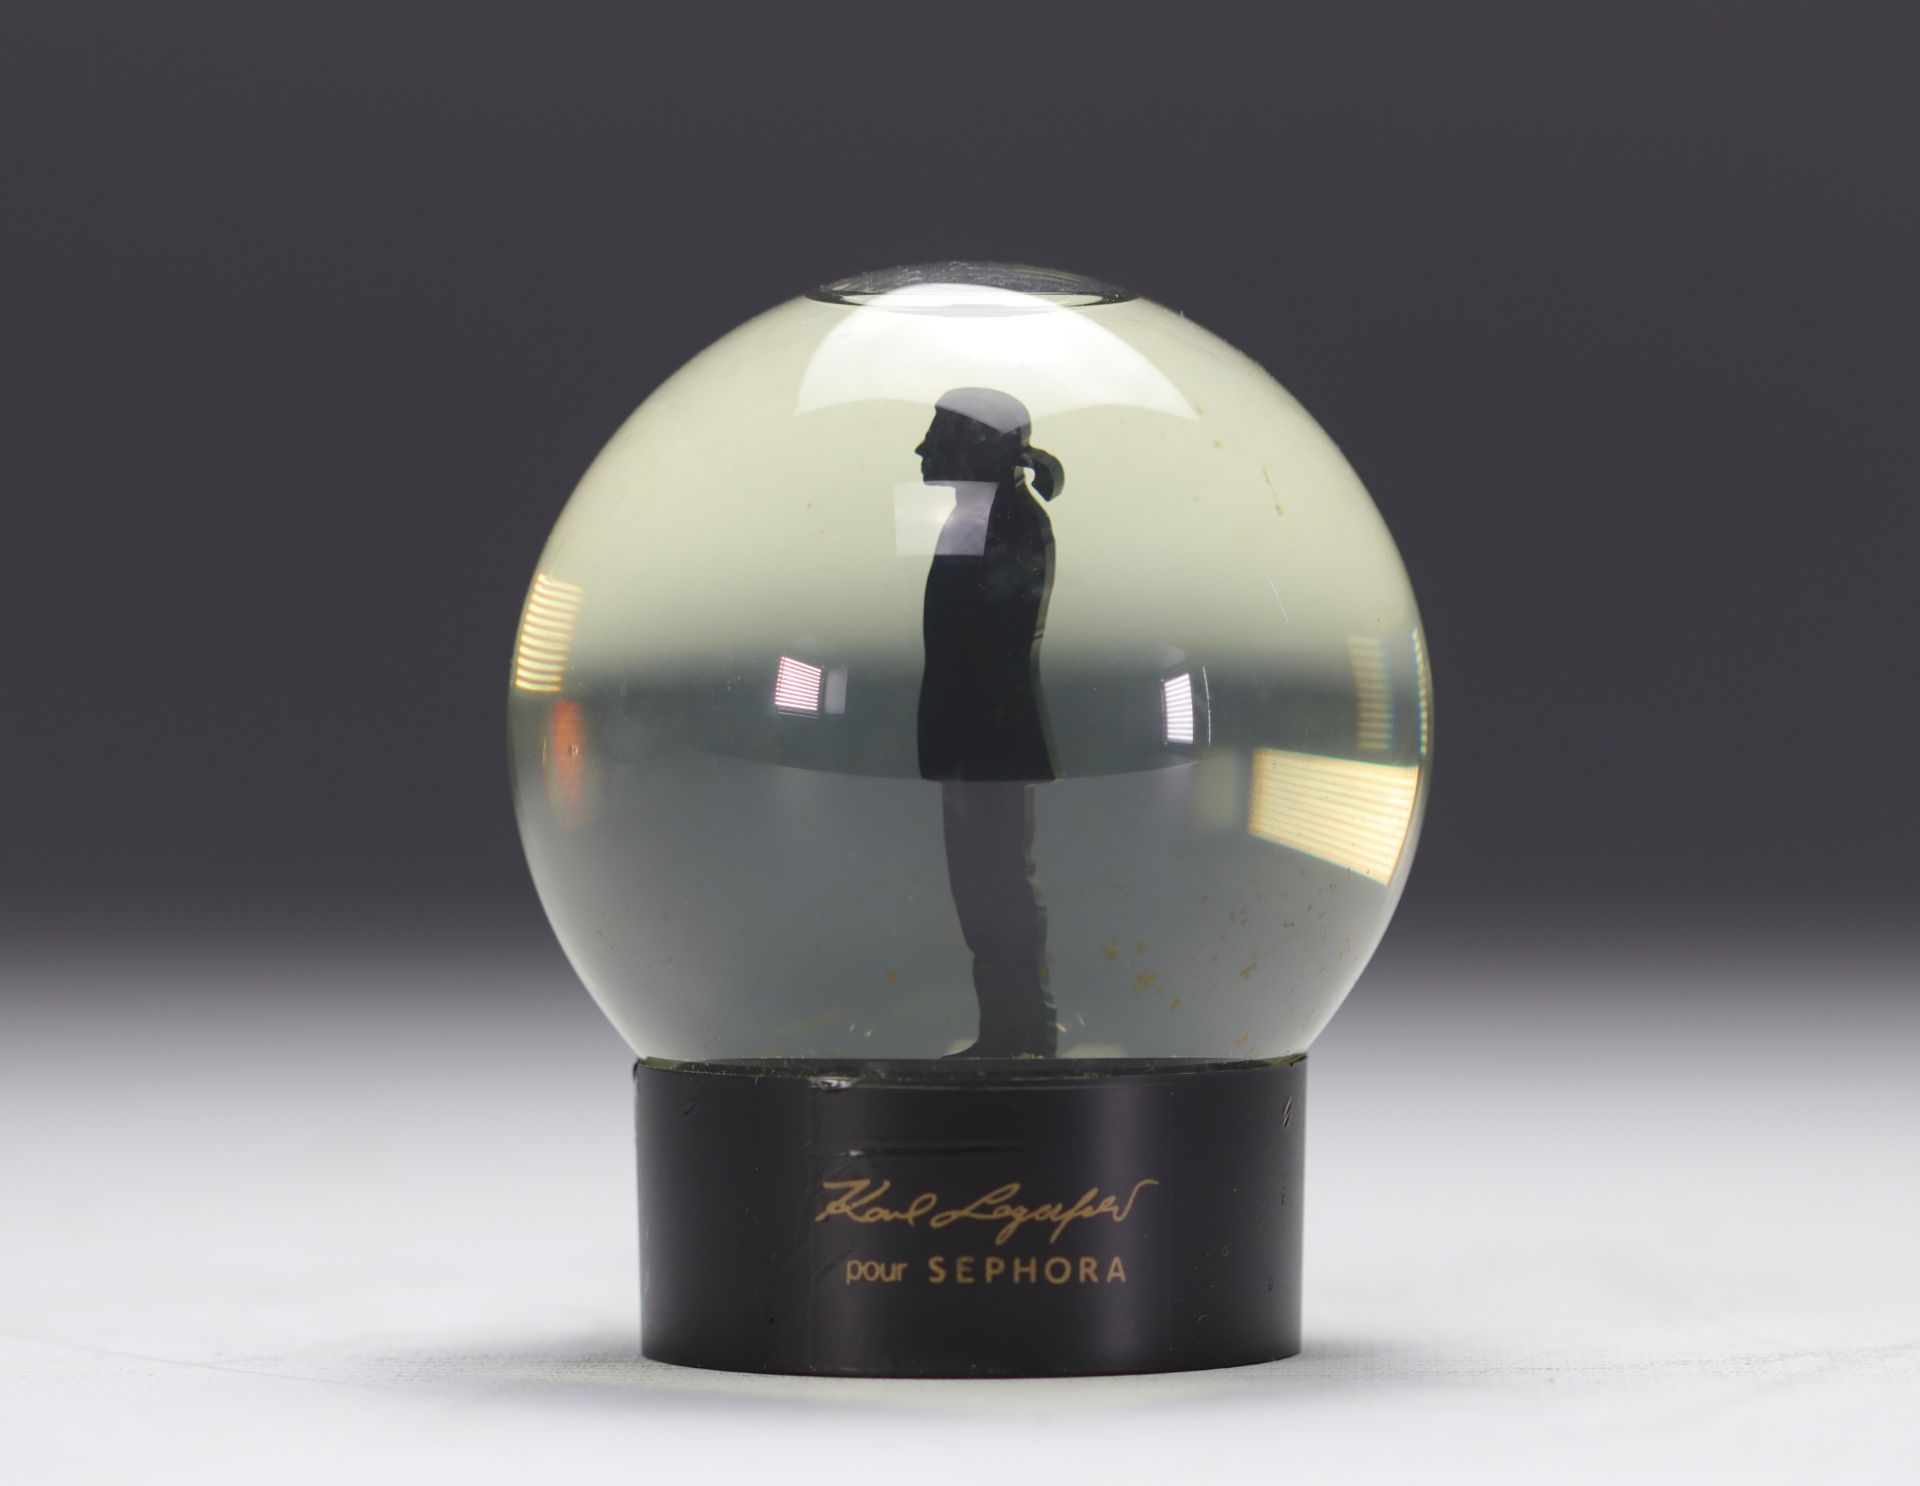 Karl Lagerfeld. "My great luxury is not having to justify to justify myself to anyone. Snow globe a